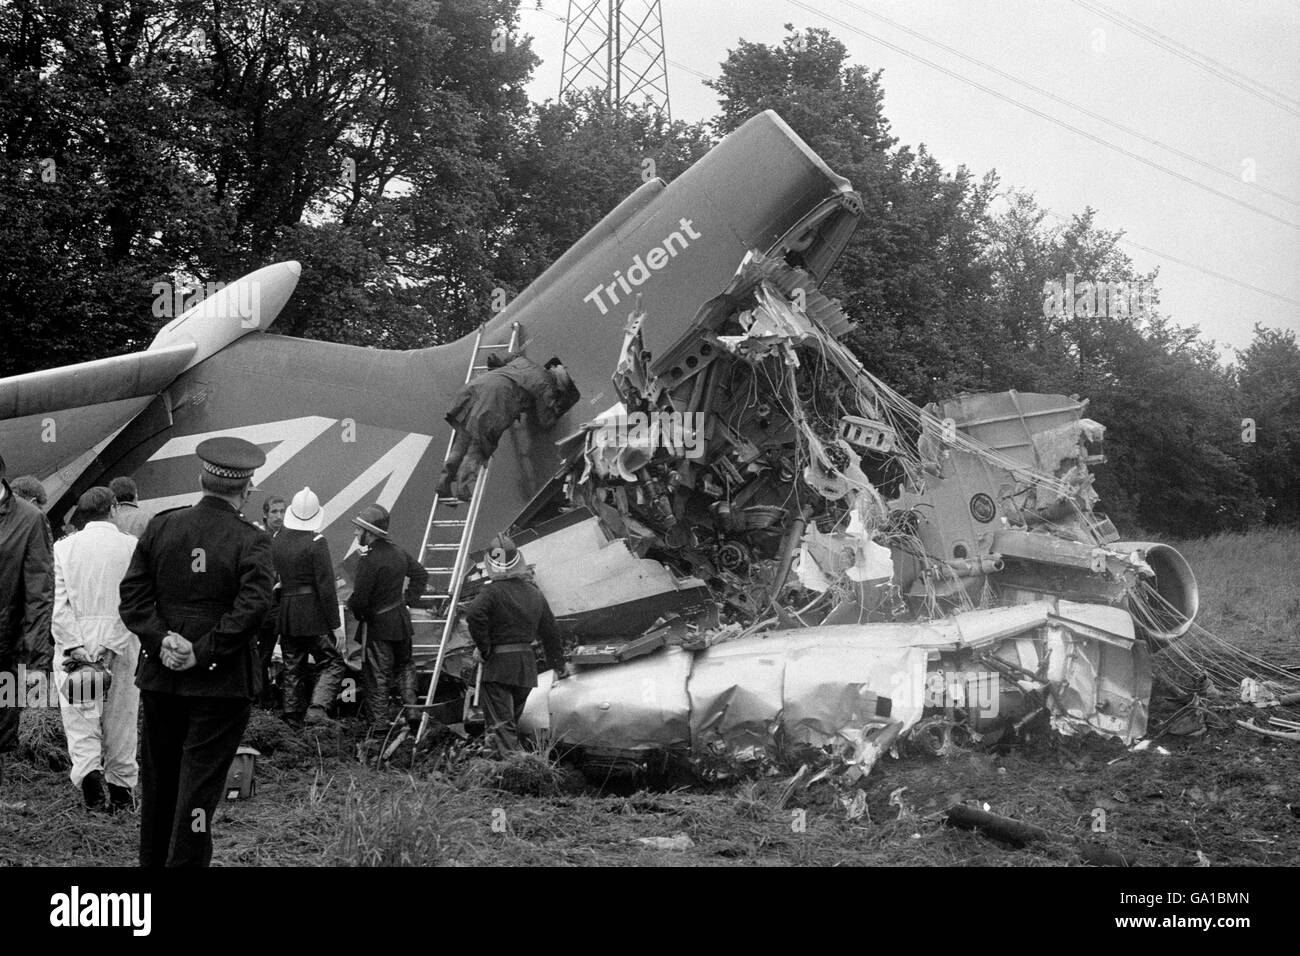 BEA Trident jet crash. The torn off tail section of the Brussels bound BEA Trident jet which crashed in a field, killing 118. Stock Photo